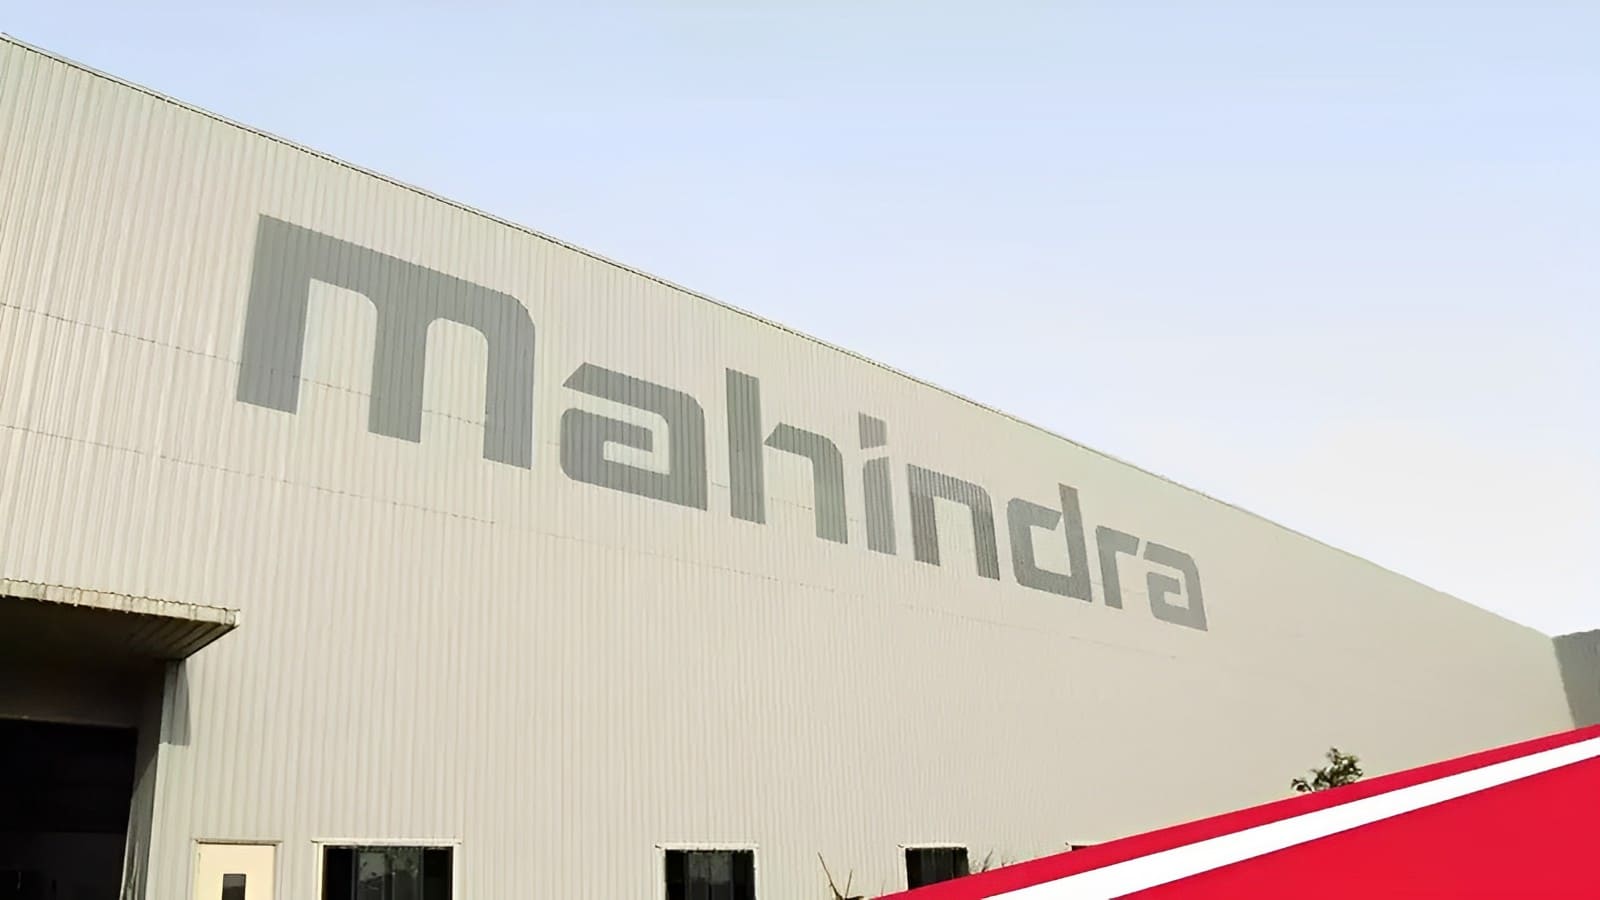 M&M to Sell 4.6% stake in Mahindra CIE through Block Deals